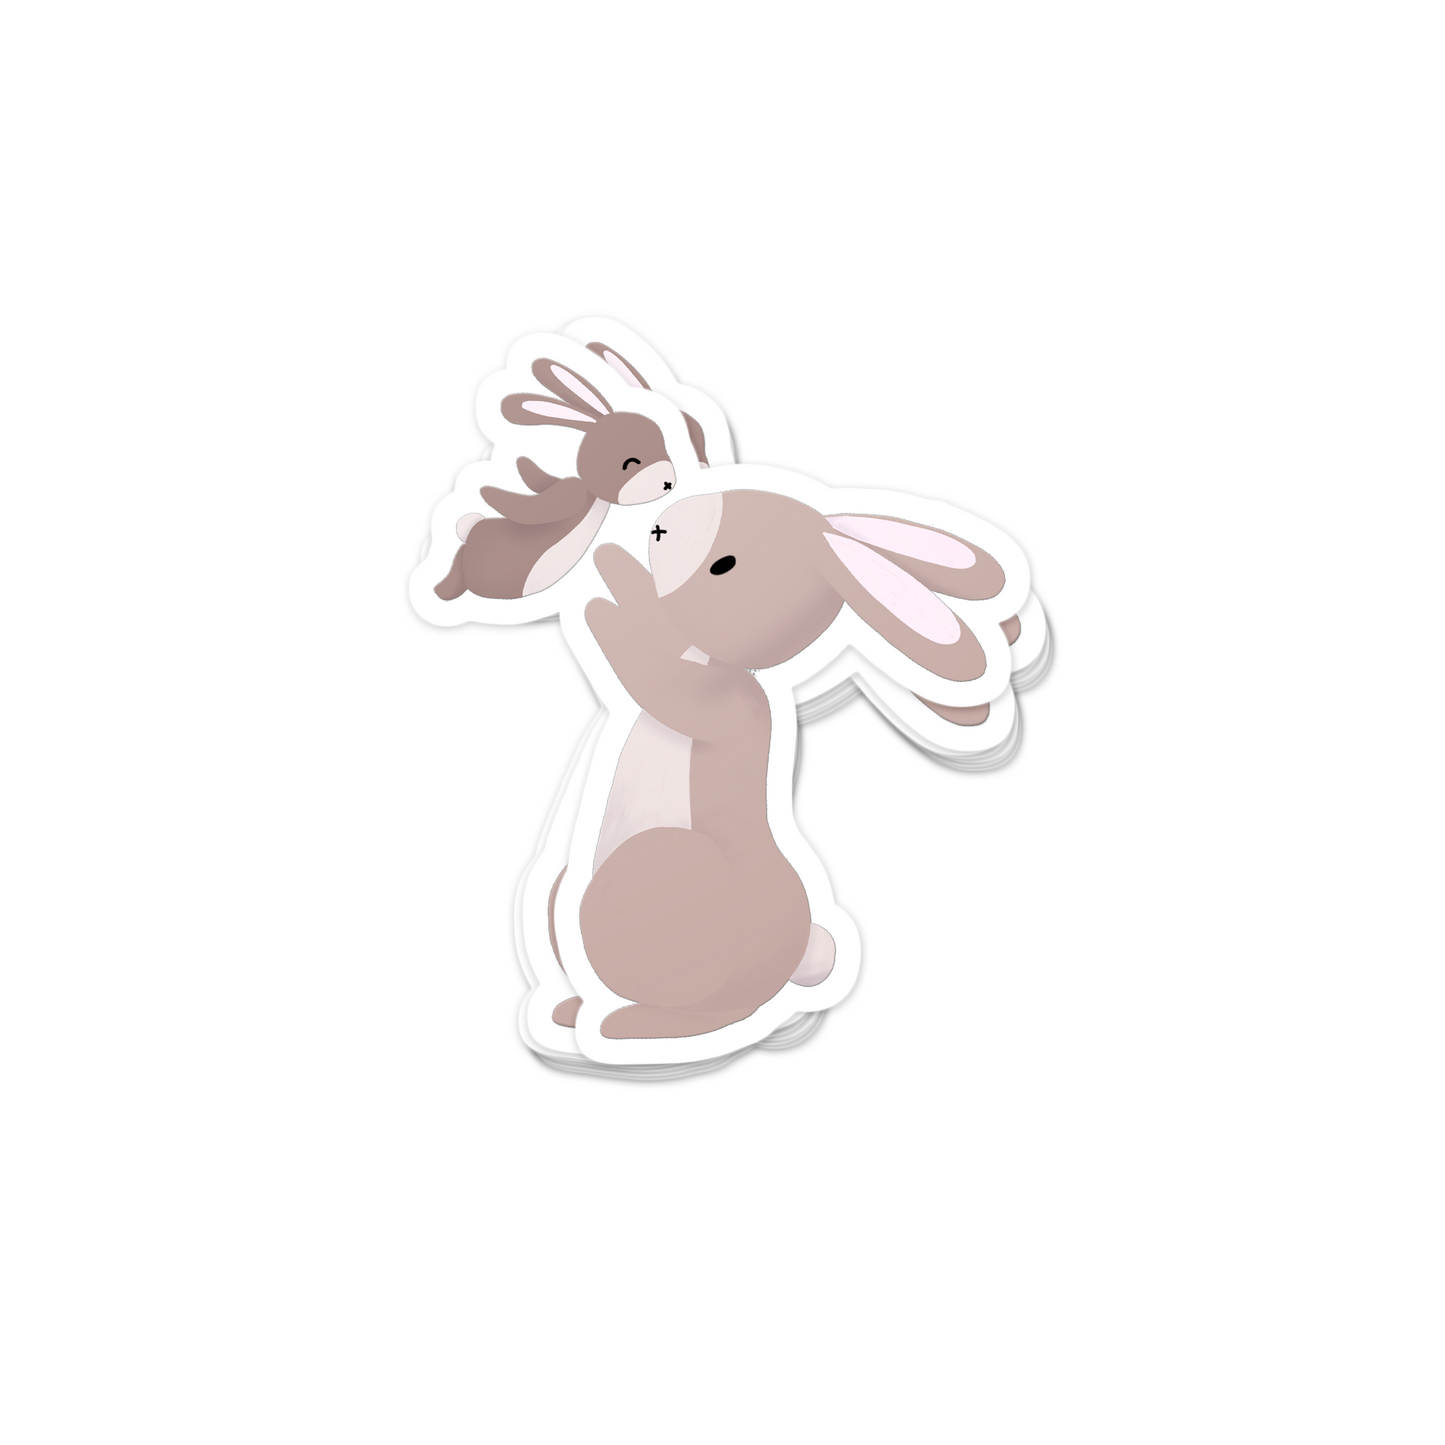 A Mother's Love Bunnies, Mother & Baby Sticker (#2 of 5)